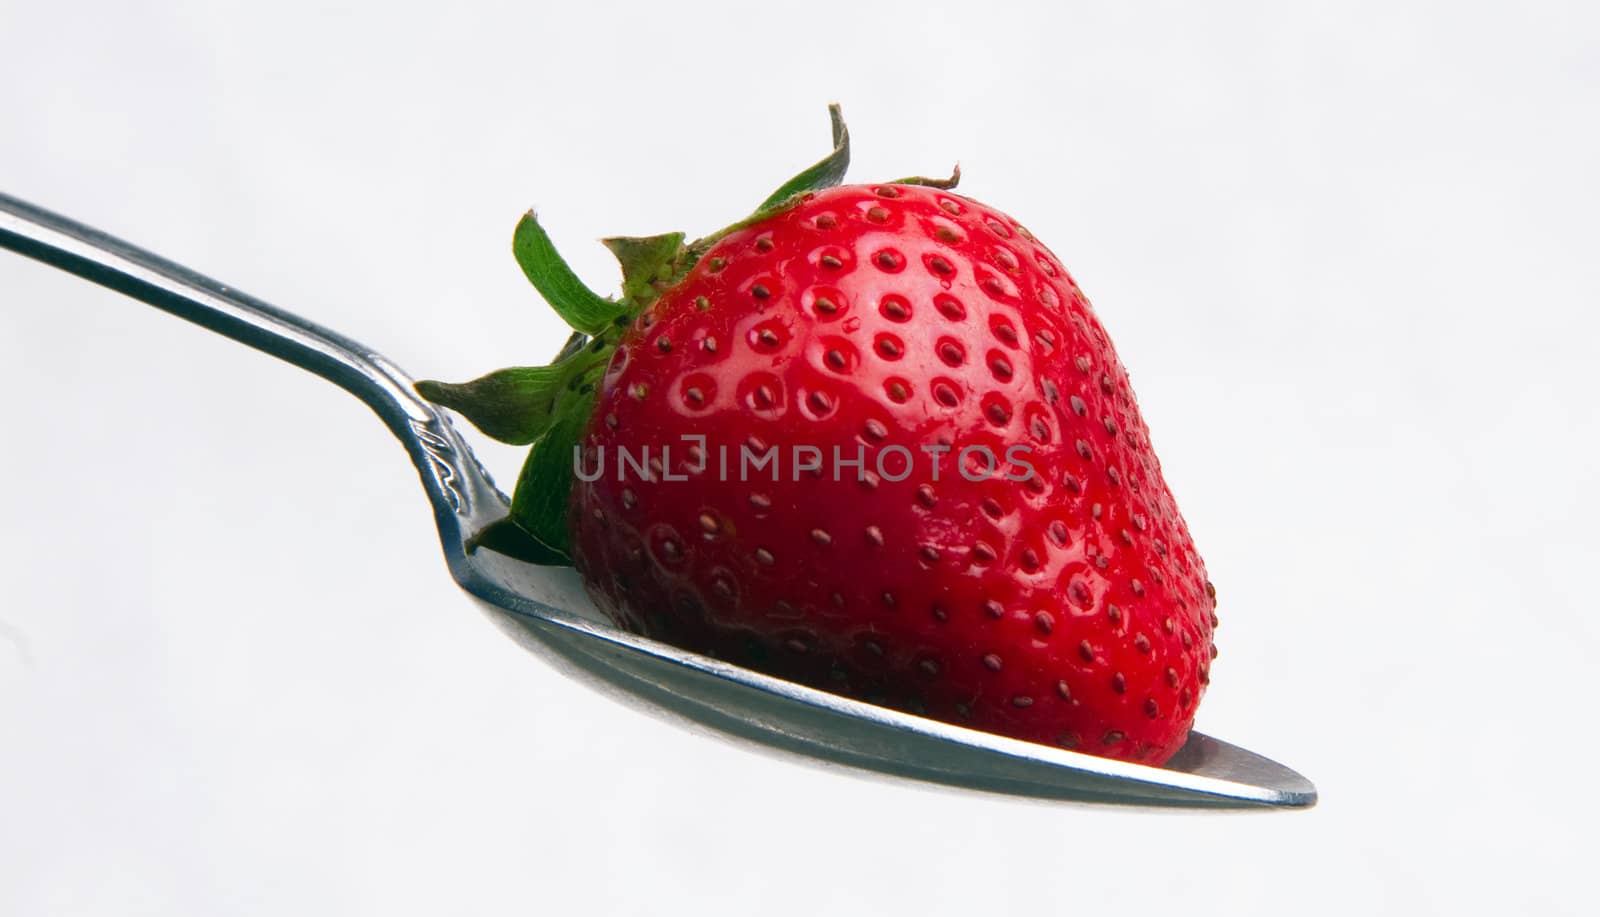 Strawberry on a Spoon by ChrisBoswell